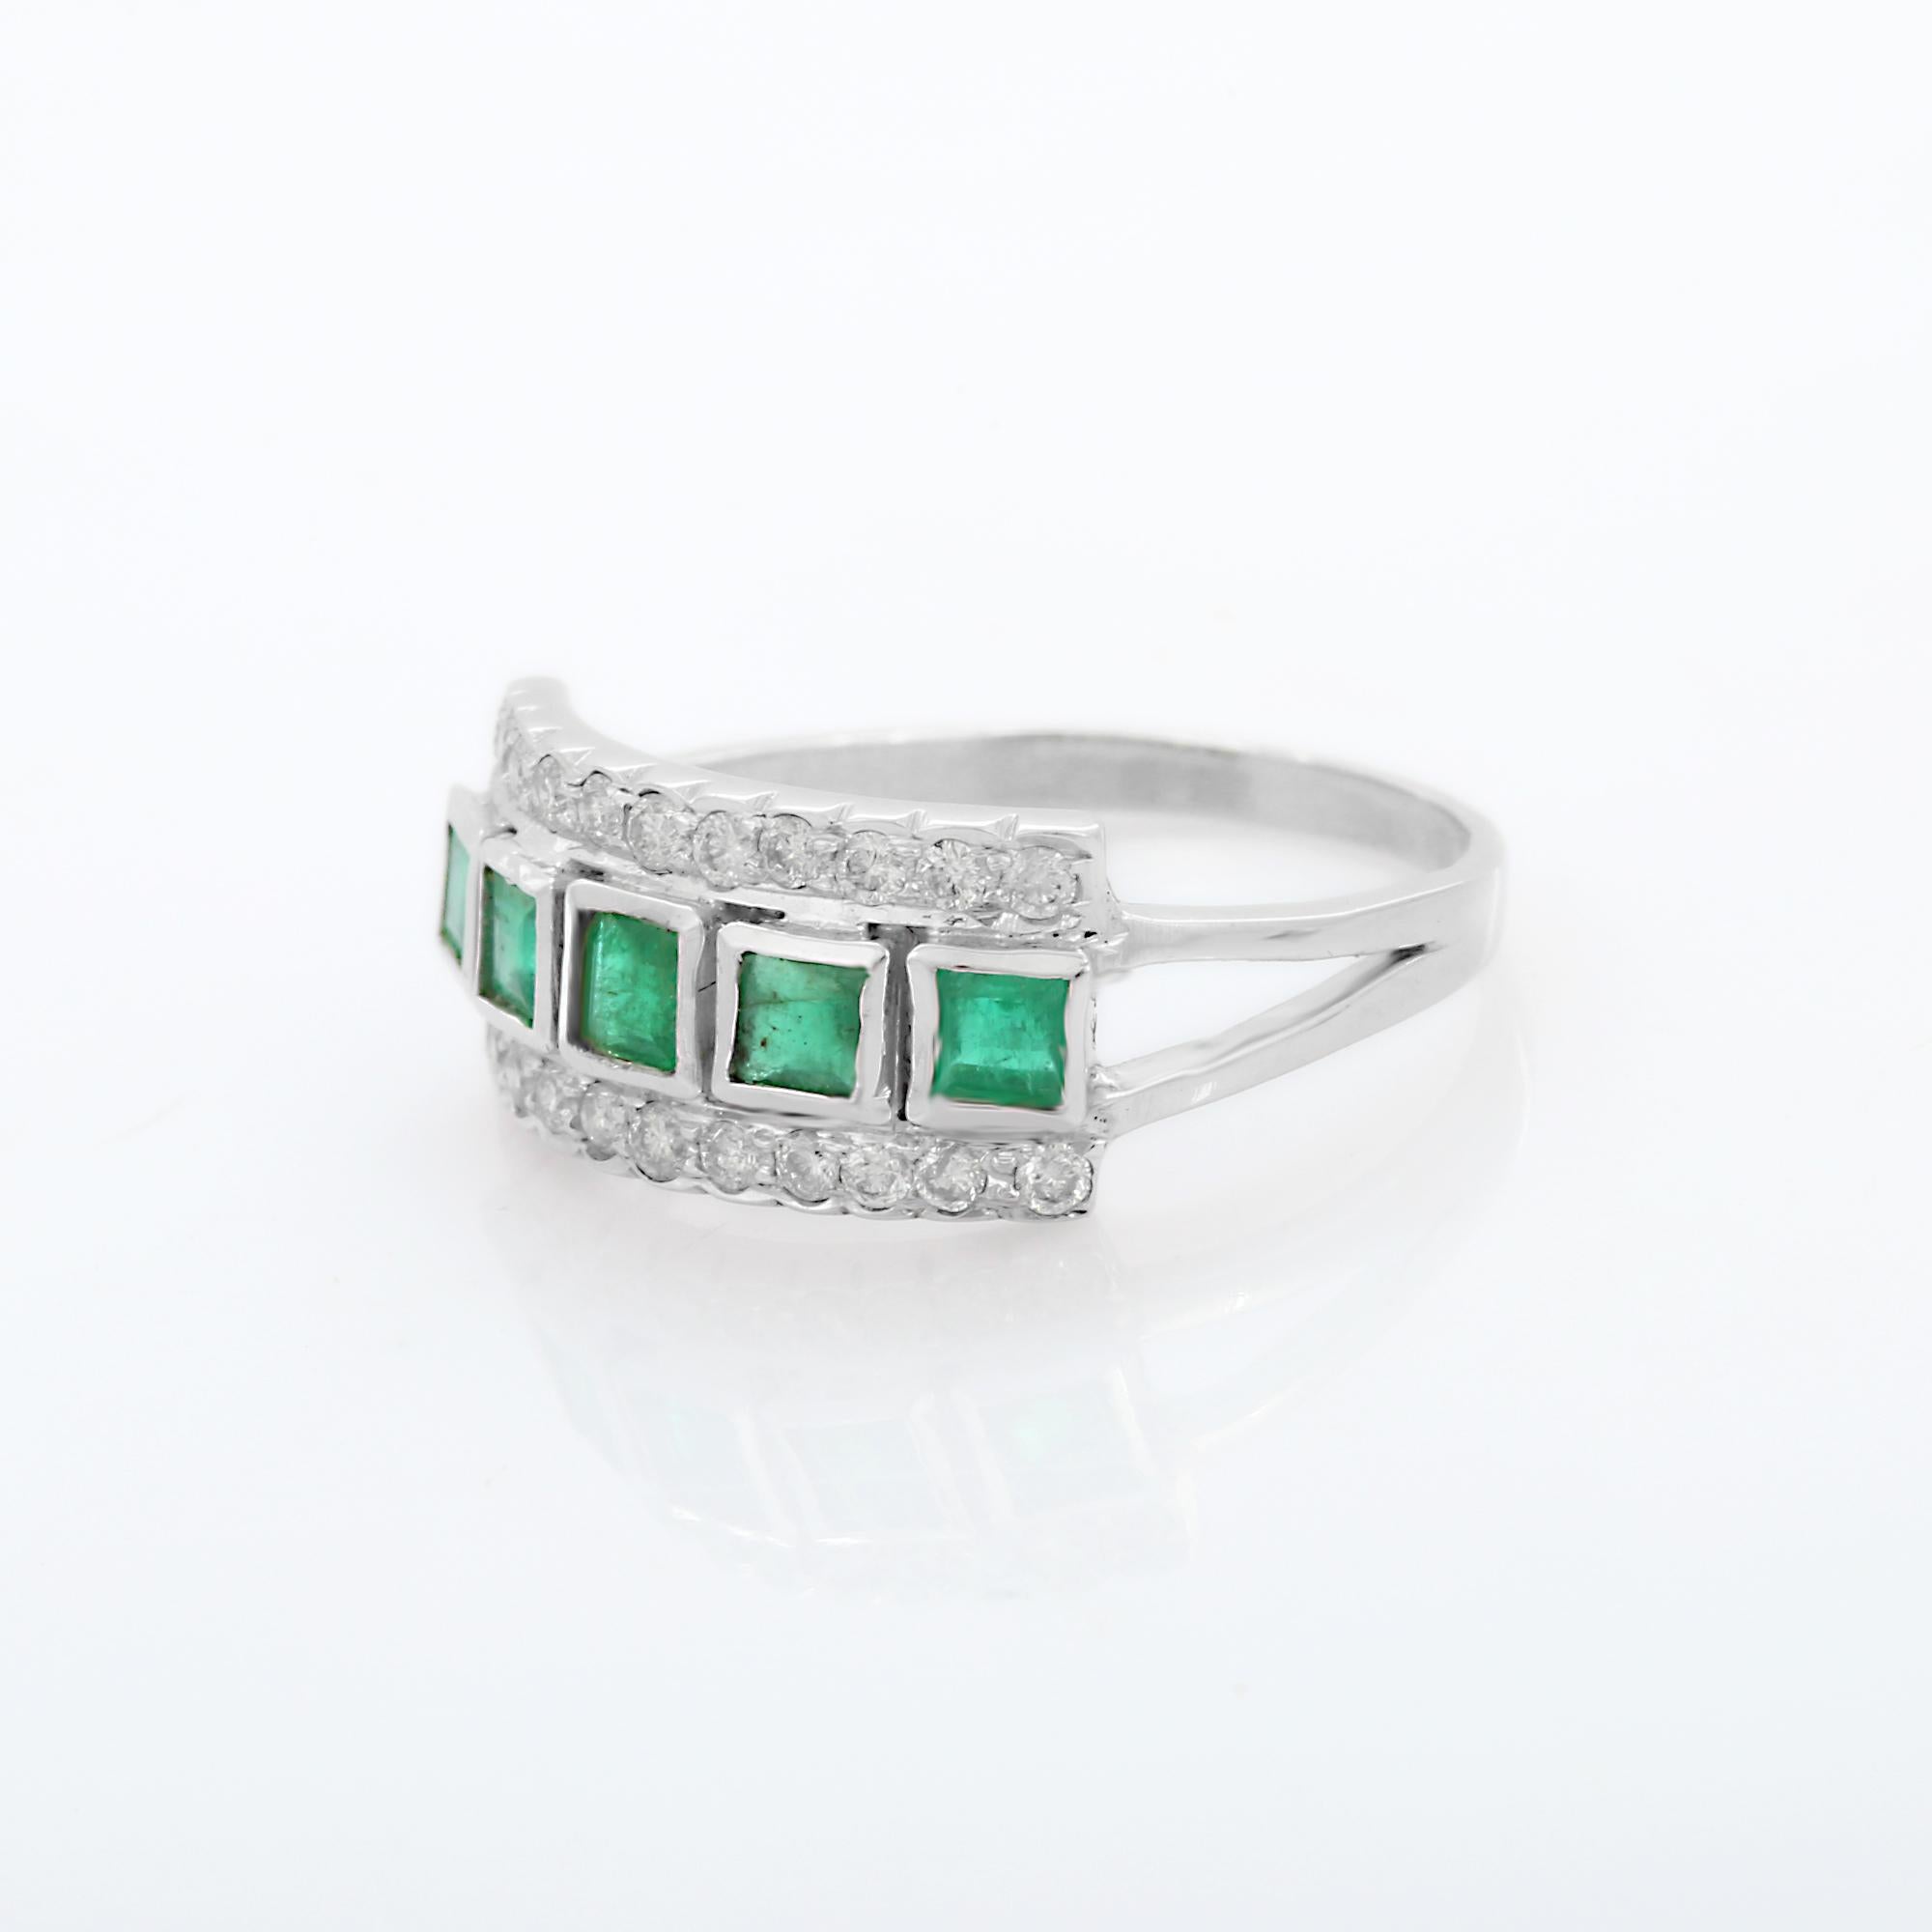 For Sale:  Statement 18k Solid White Gold Square Emerald Diamond Ring 4